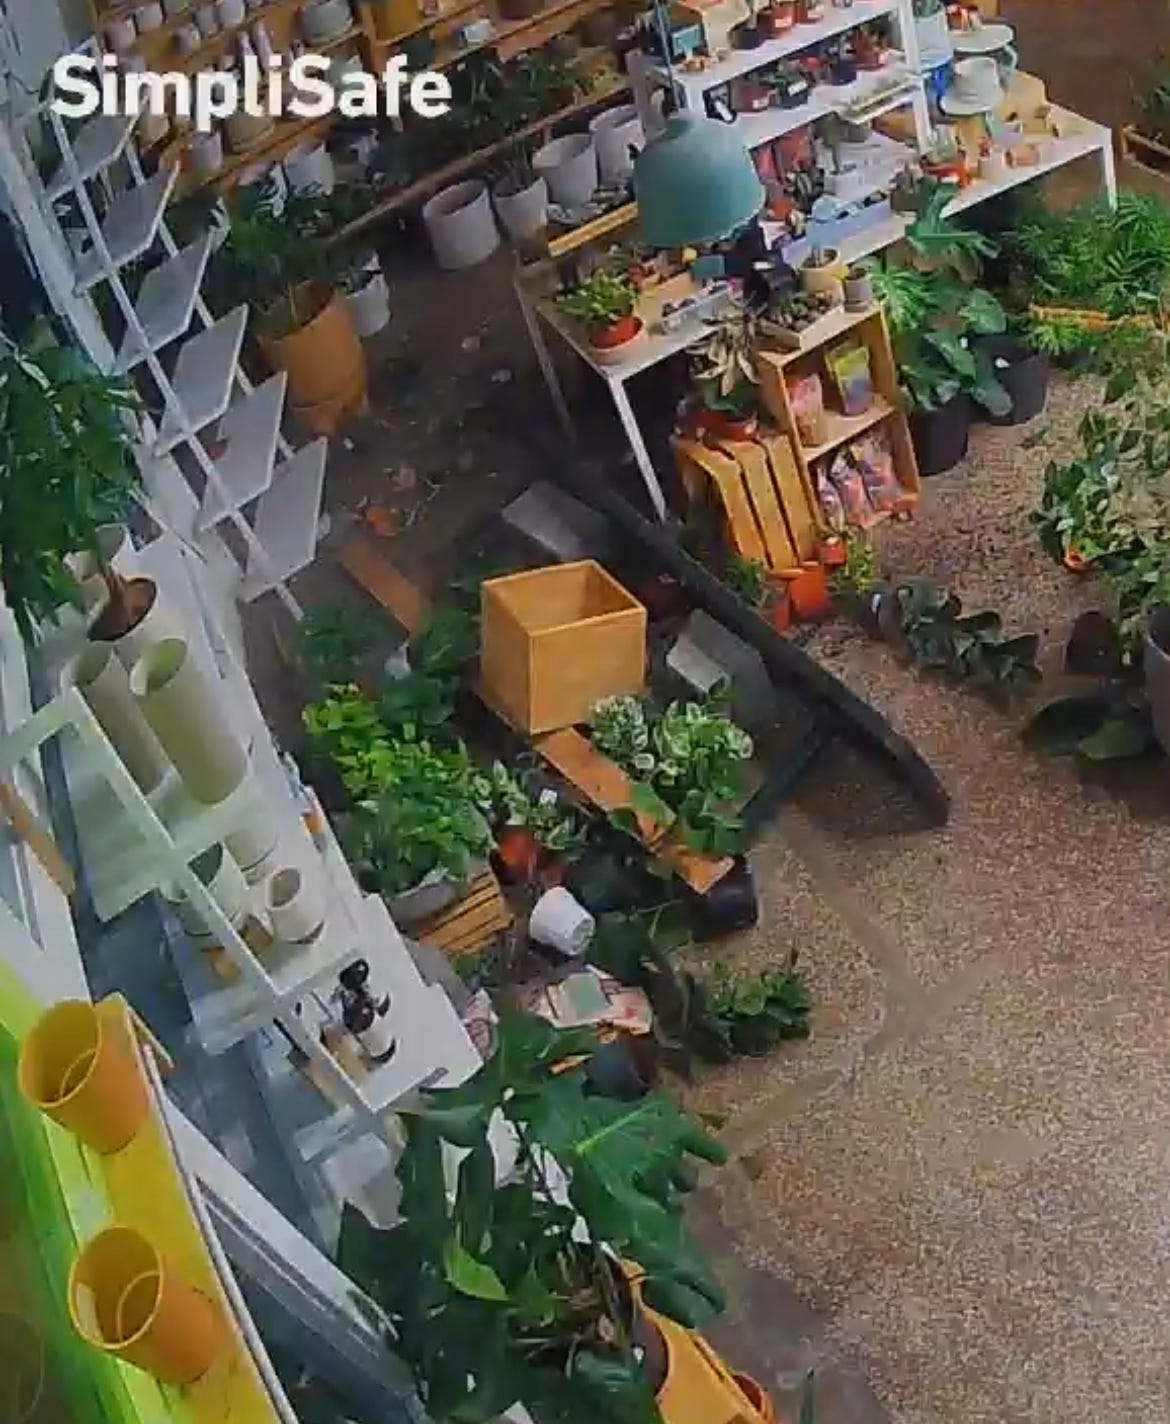 screen shot of security camera footage in a retail shop in disarray